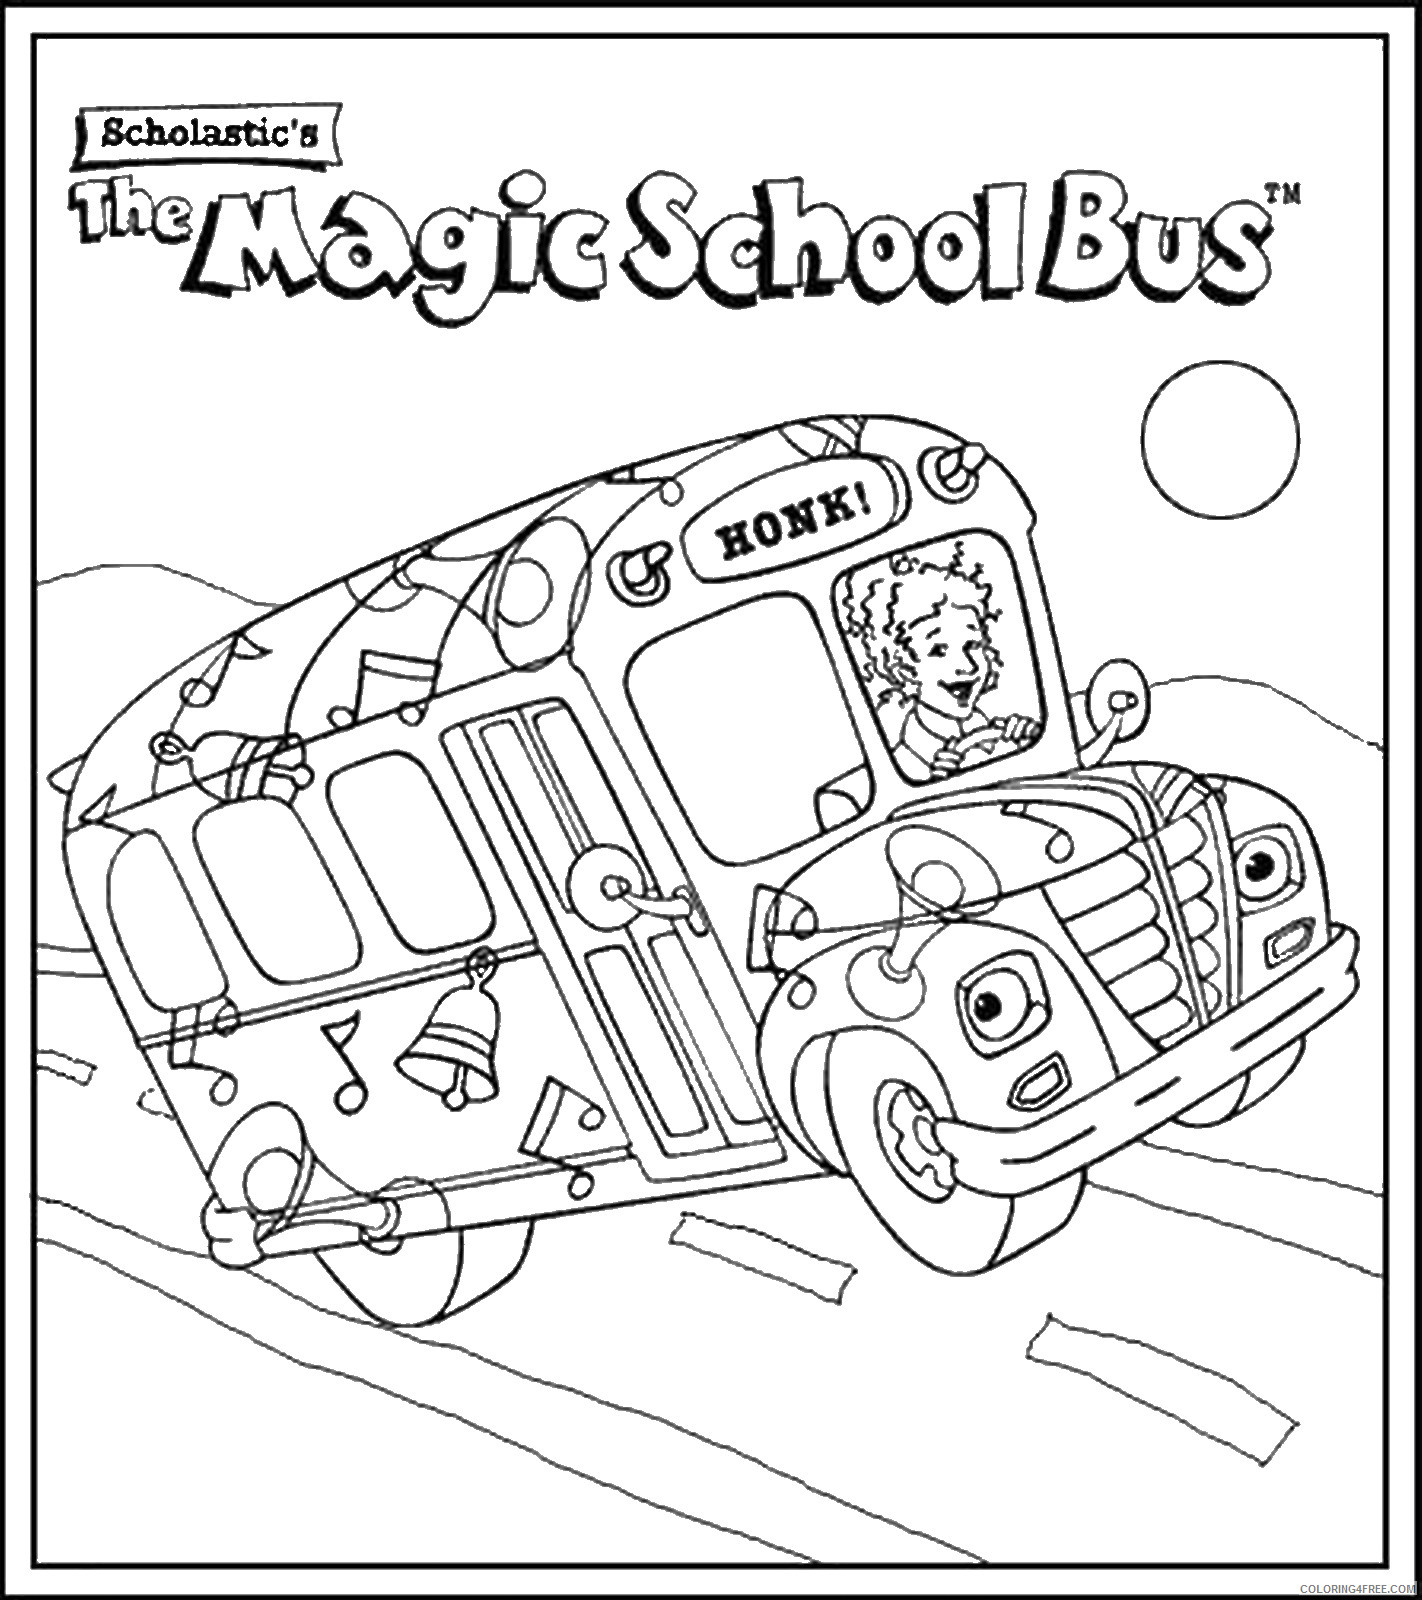 The Magic School Bus Coloring Pages Cartoons magic_school_bus_cl04 Printable 2020 6476 Coloring4free